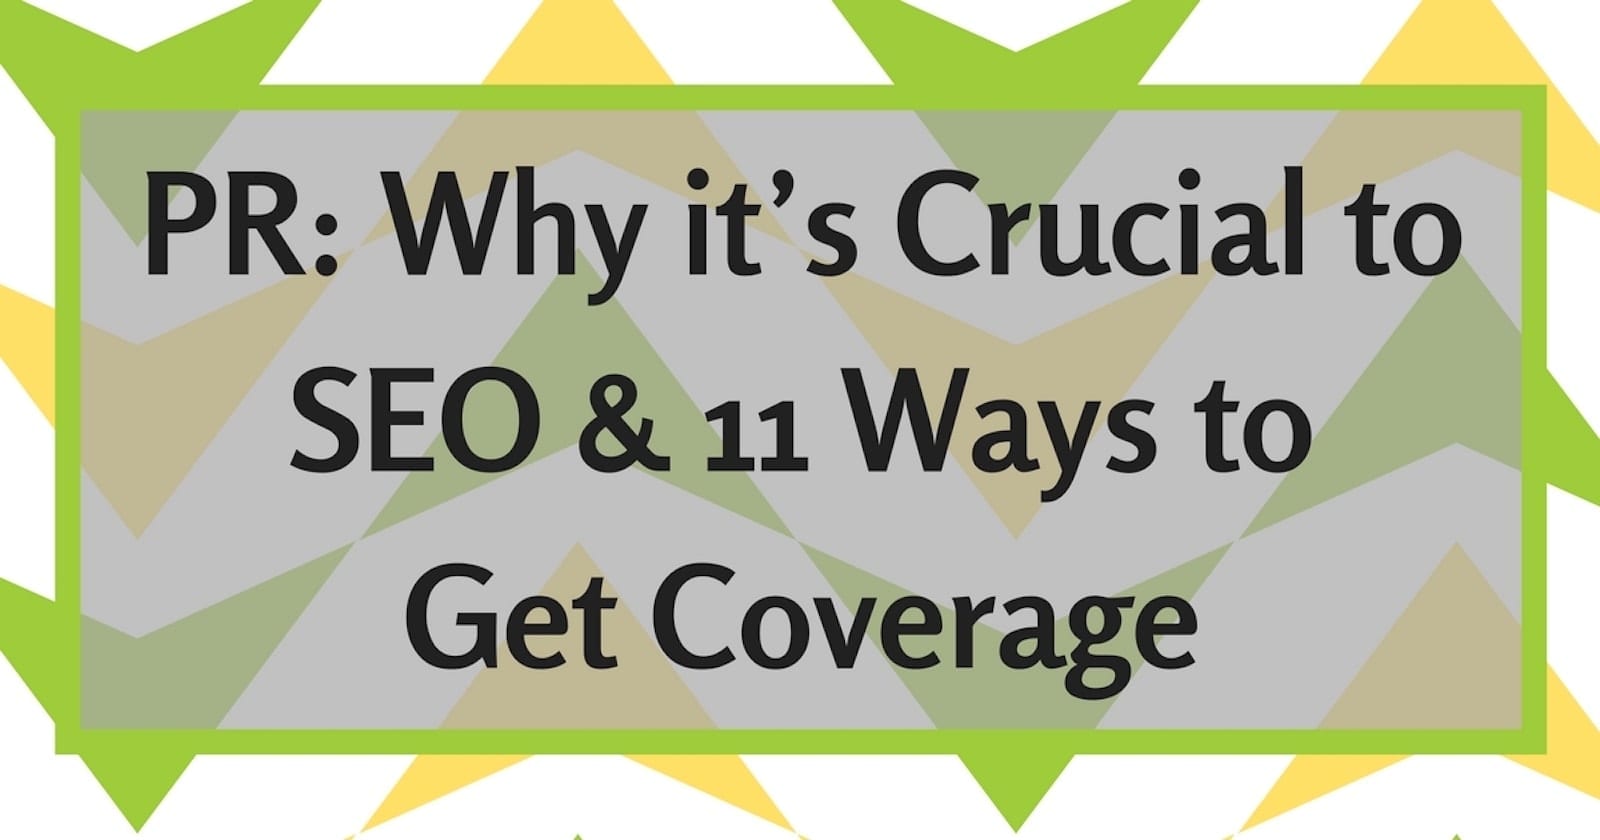 PR_-Why-it’s-Crucial-to-SEO-11-Ways-to-Get-Coverage.jpg